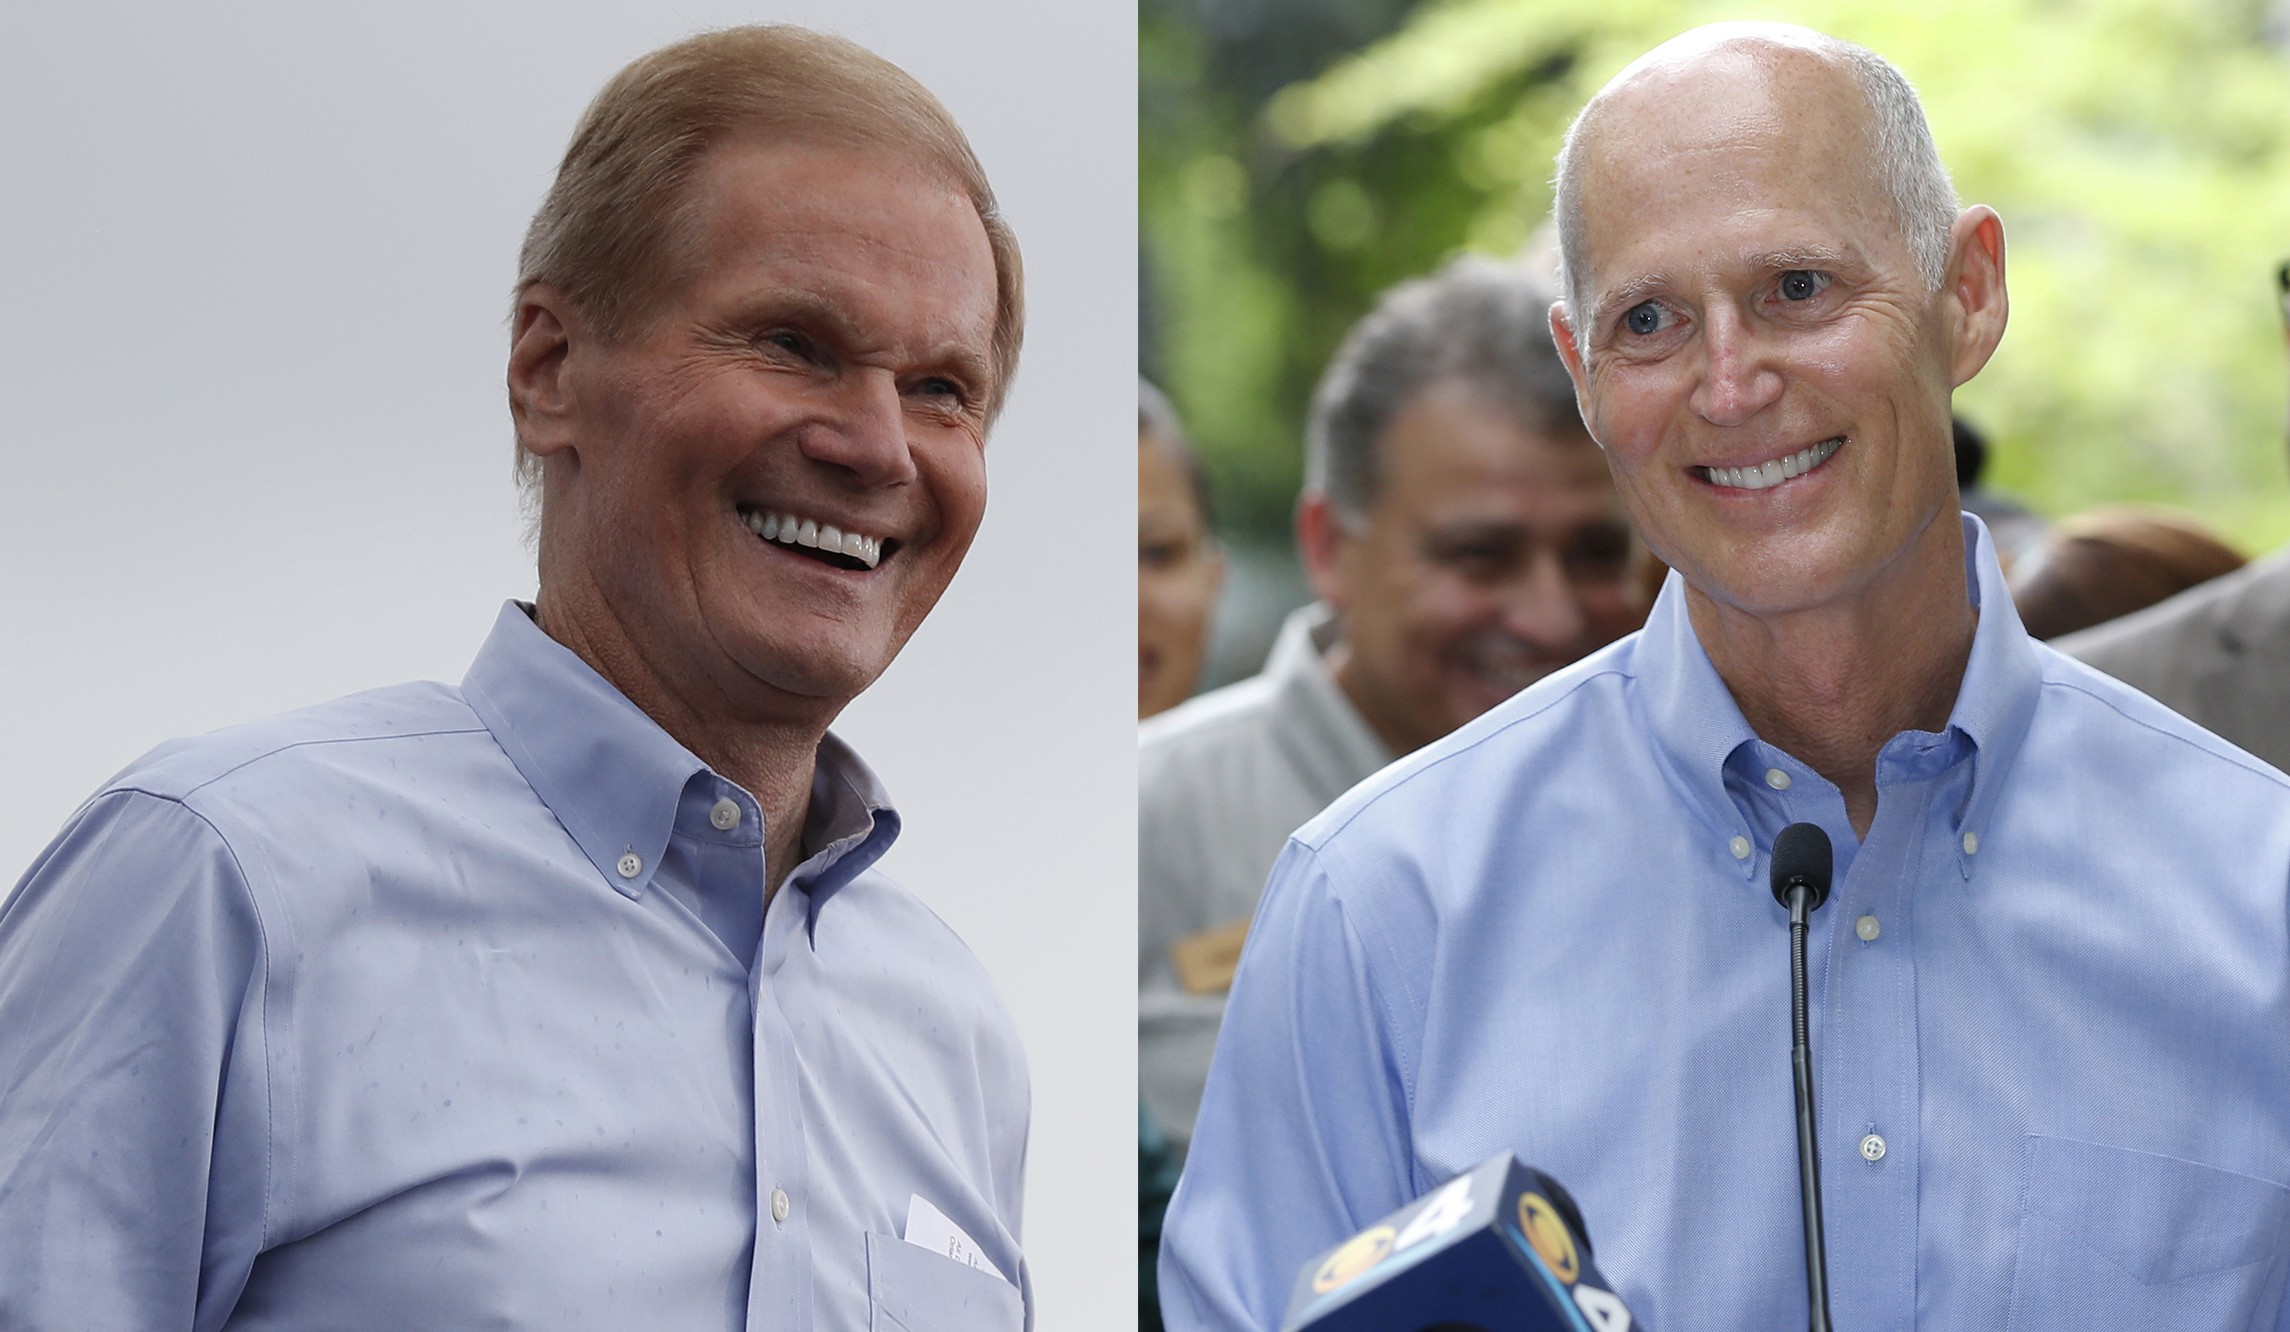 Bill Nelson throws shade at Rick Scott over personal 'enrichment'